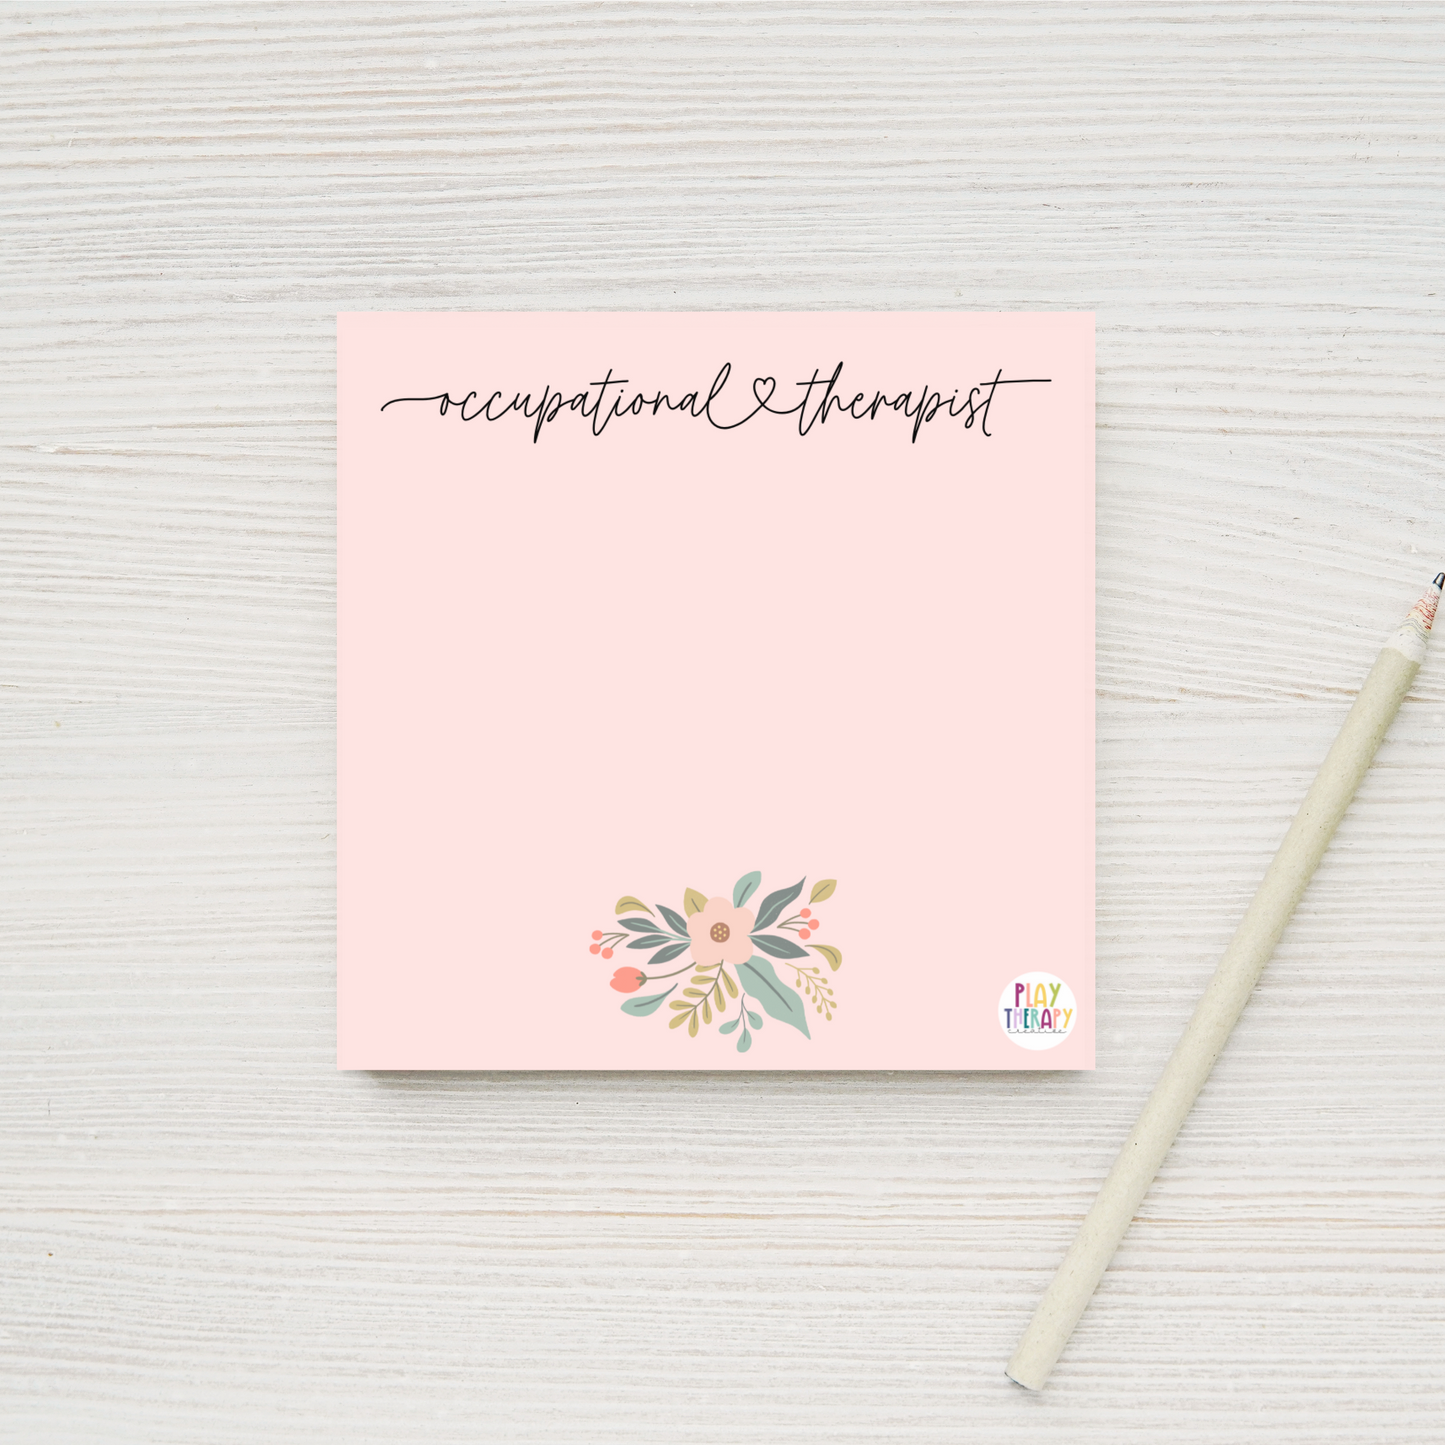 Occupational Therapist Floral Sticky Notes